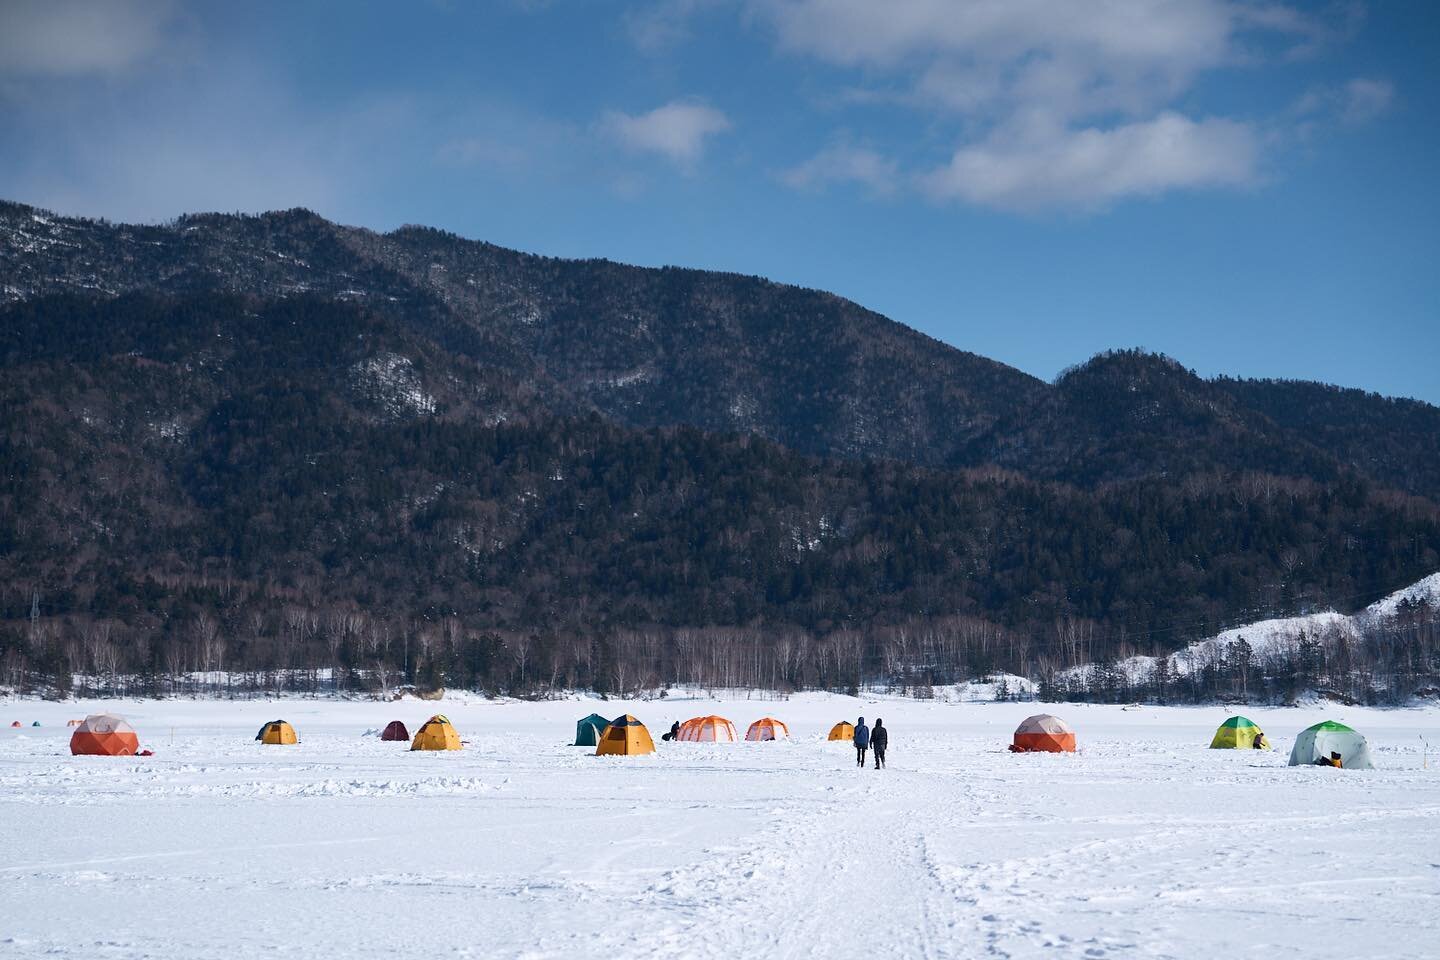 Some tents used for fishing, on the frozen lake Nukabira.